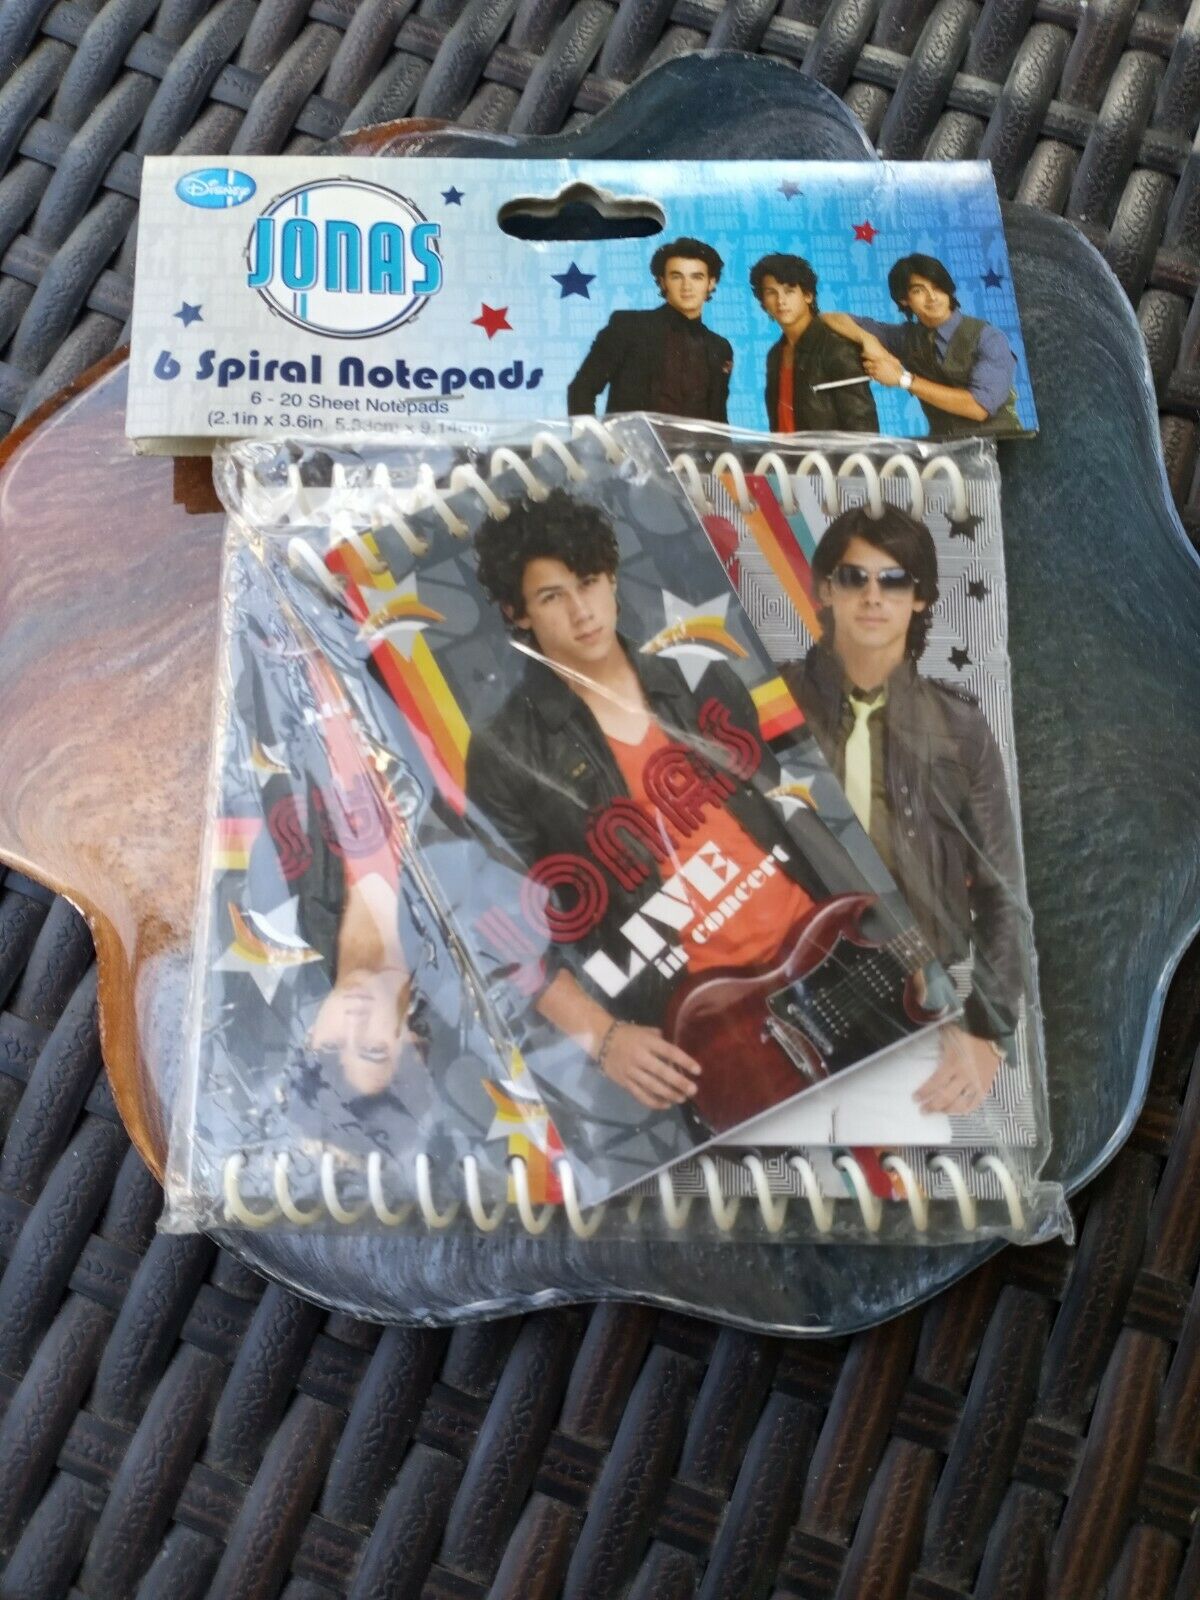 Jonas Brothers 2009 Spiral Notepads New In Package